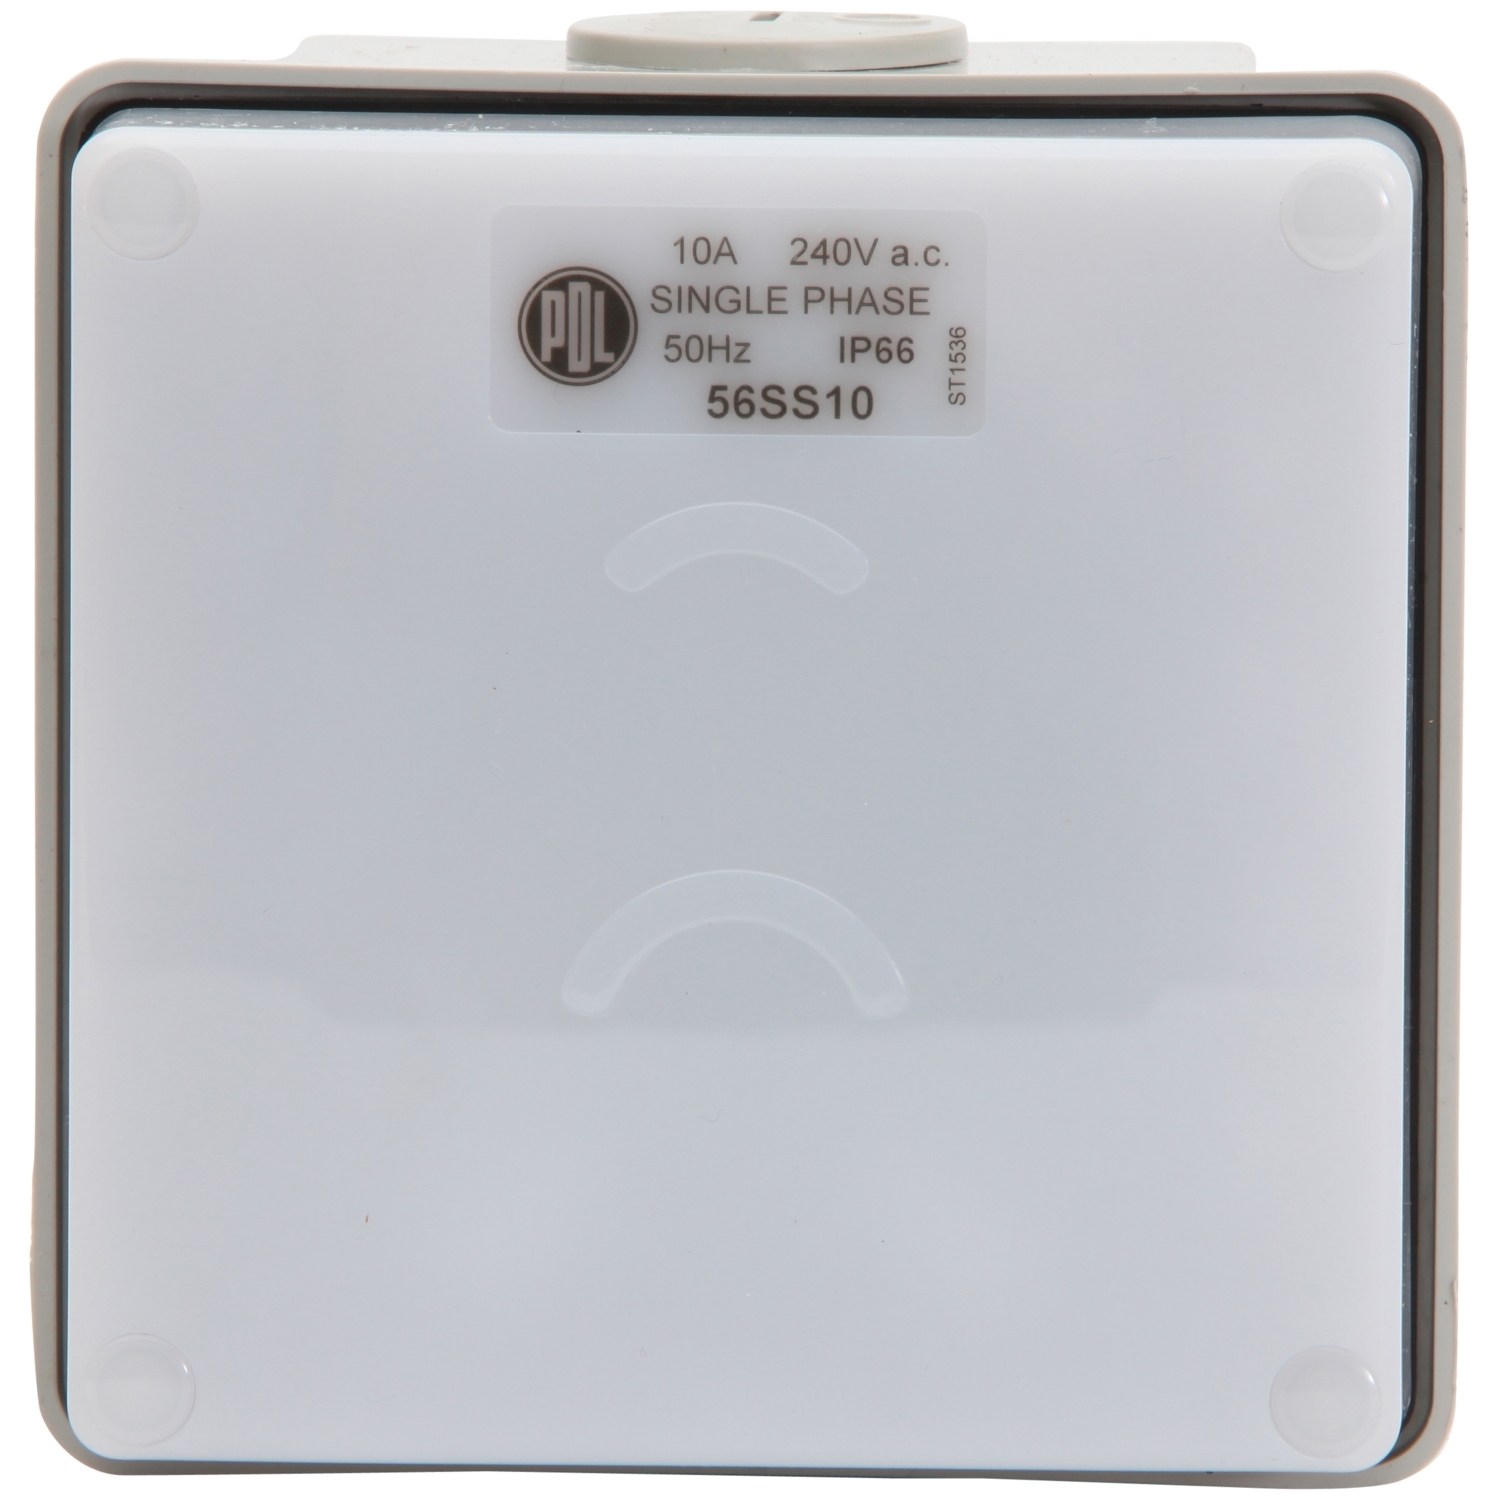 PDL56SS10WE - PDL 56 Sunset Switch Photoelectric IP66 10Amp - White